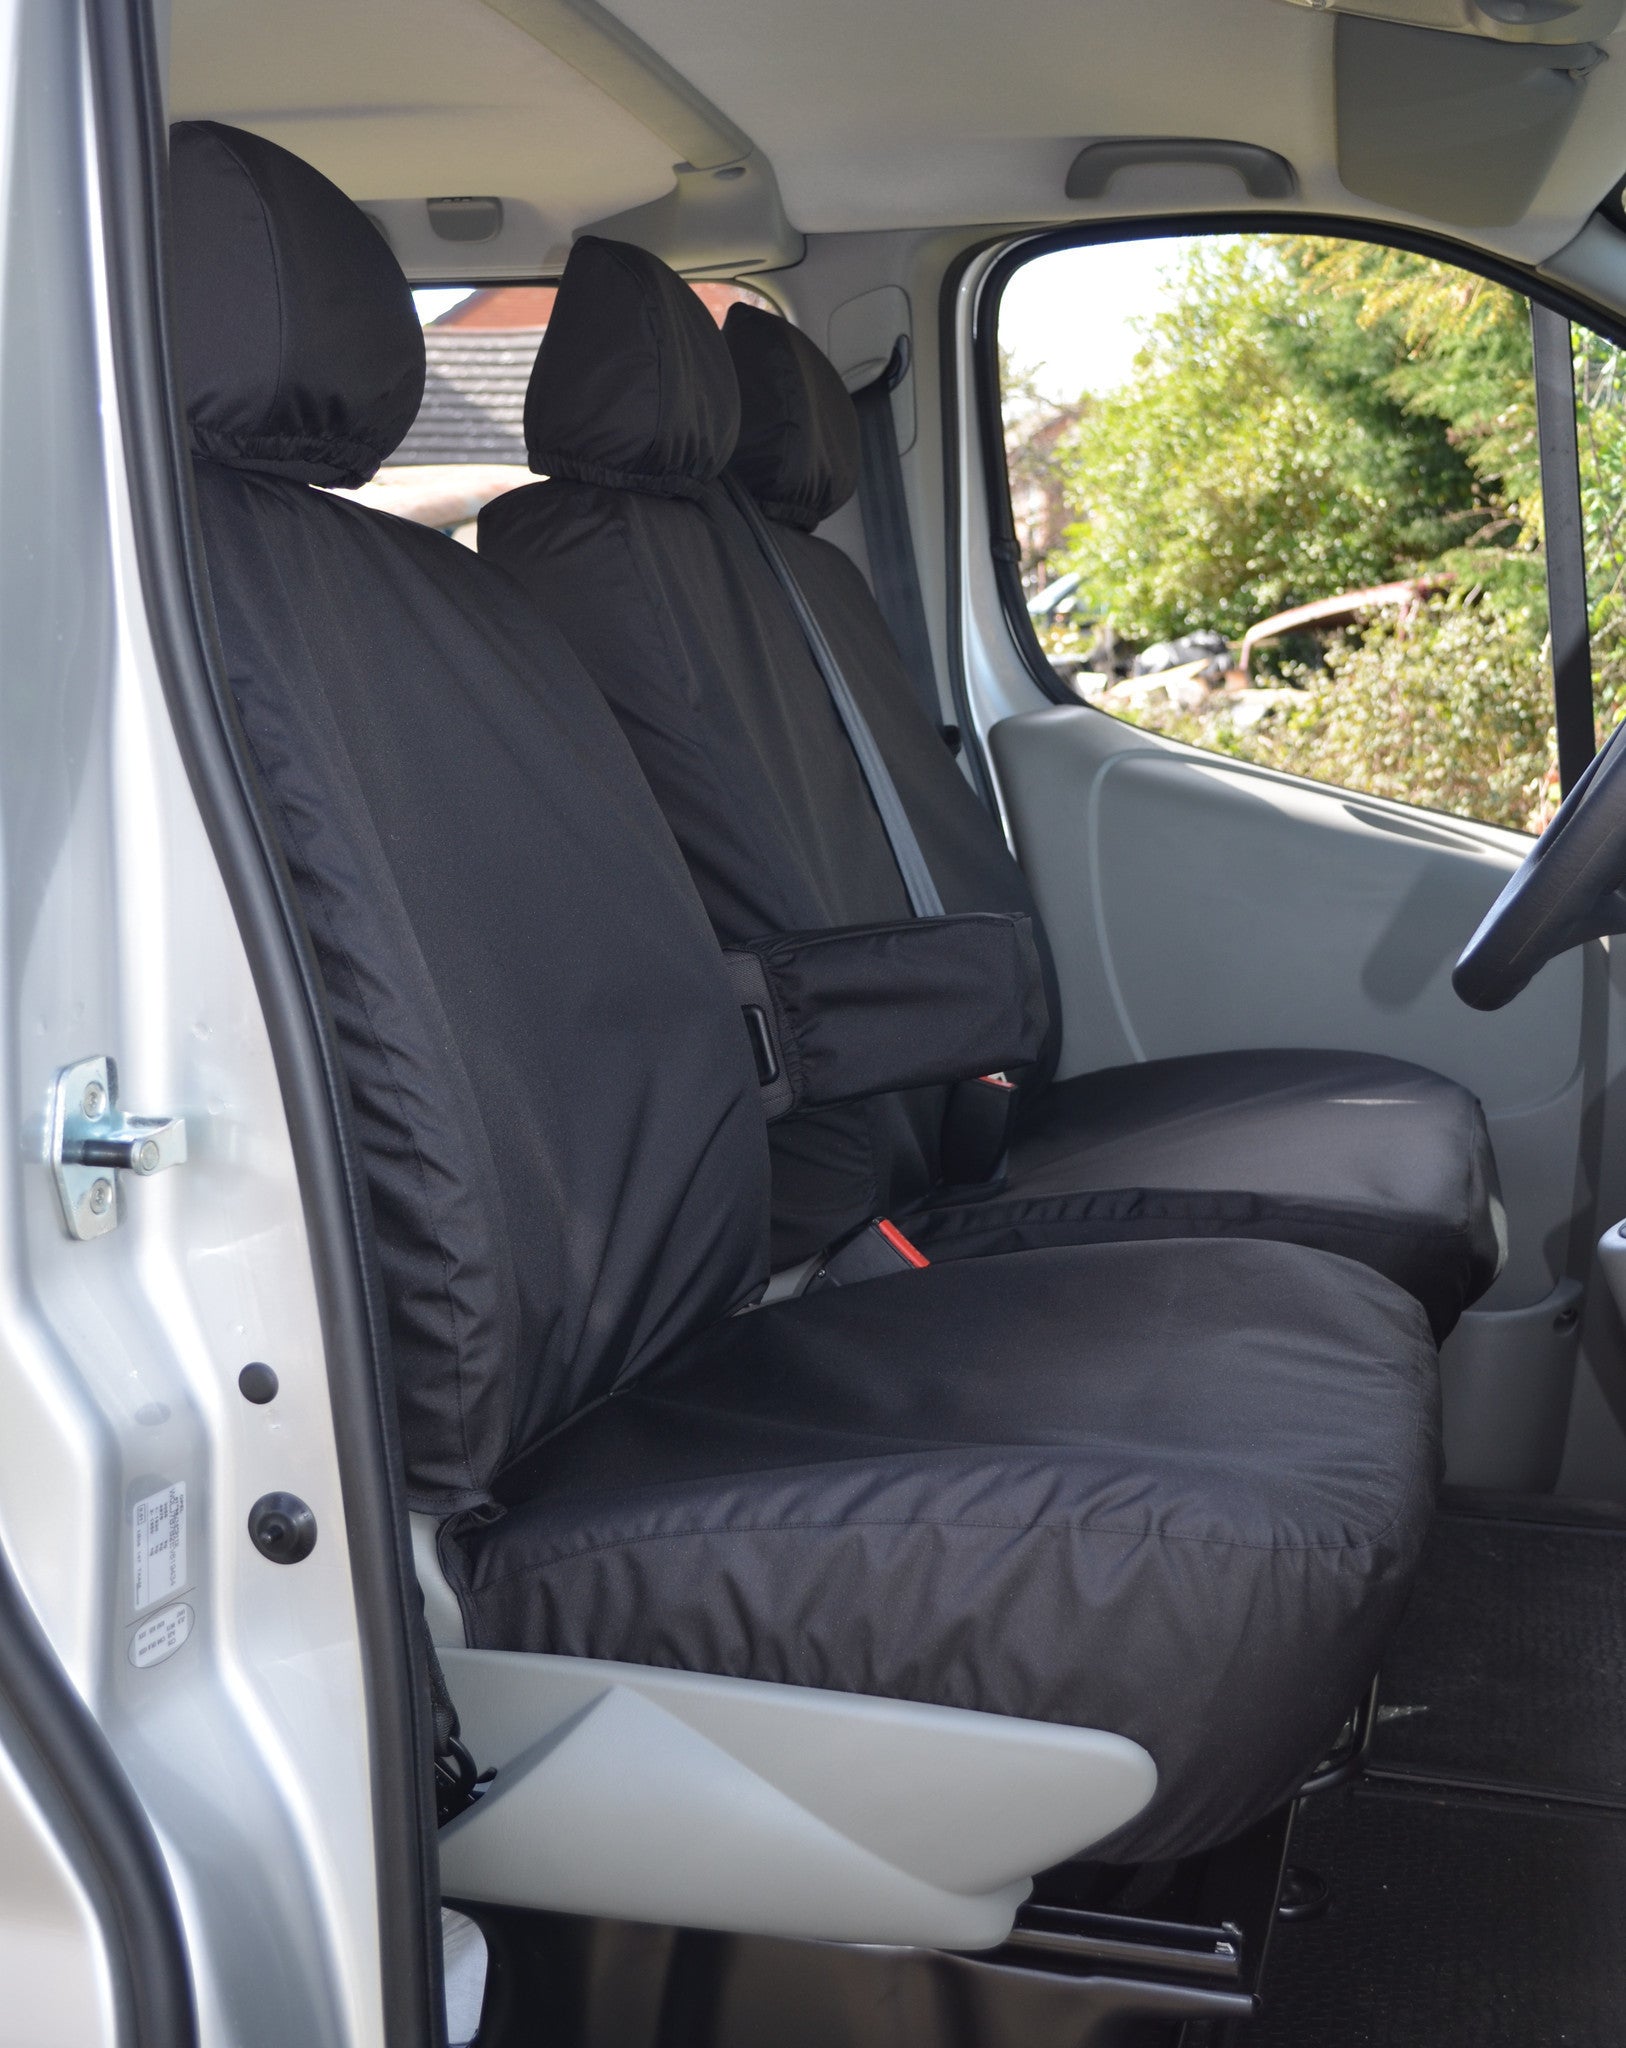 Nissan Primastar 2002 - 2006 Tailored Front Seat Covers Black / With Driver's Armrest Turtle Covers Ltd